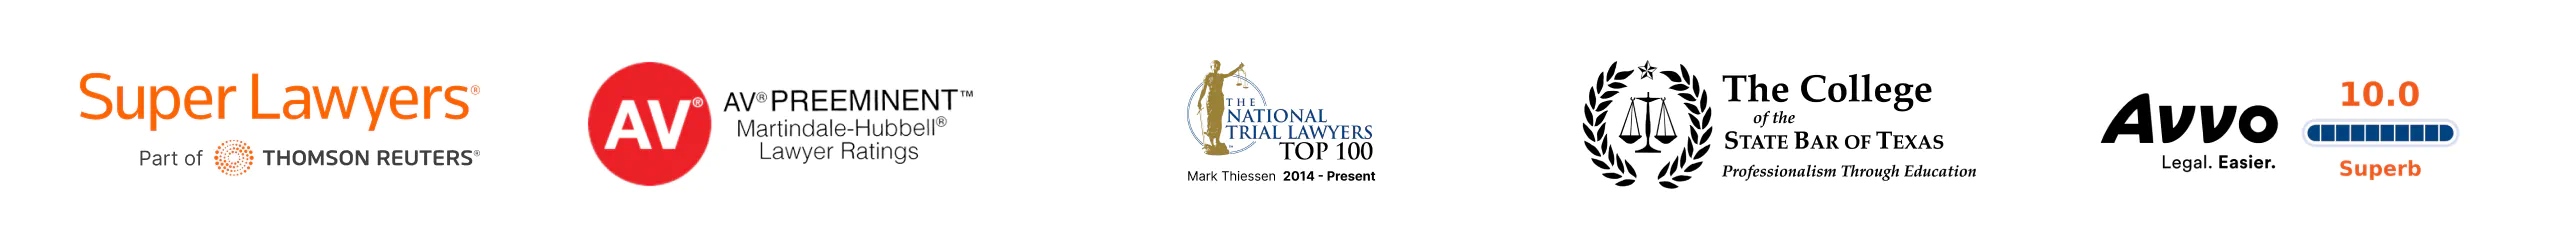 Company Awards: Super Lawyers, AV Preeminent Martindale-Hubbell Lawyer Rating, The National Trial Lawyers Top 100, Avvo Superb 10.0 Rating